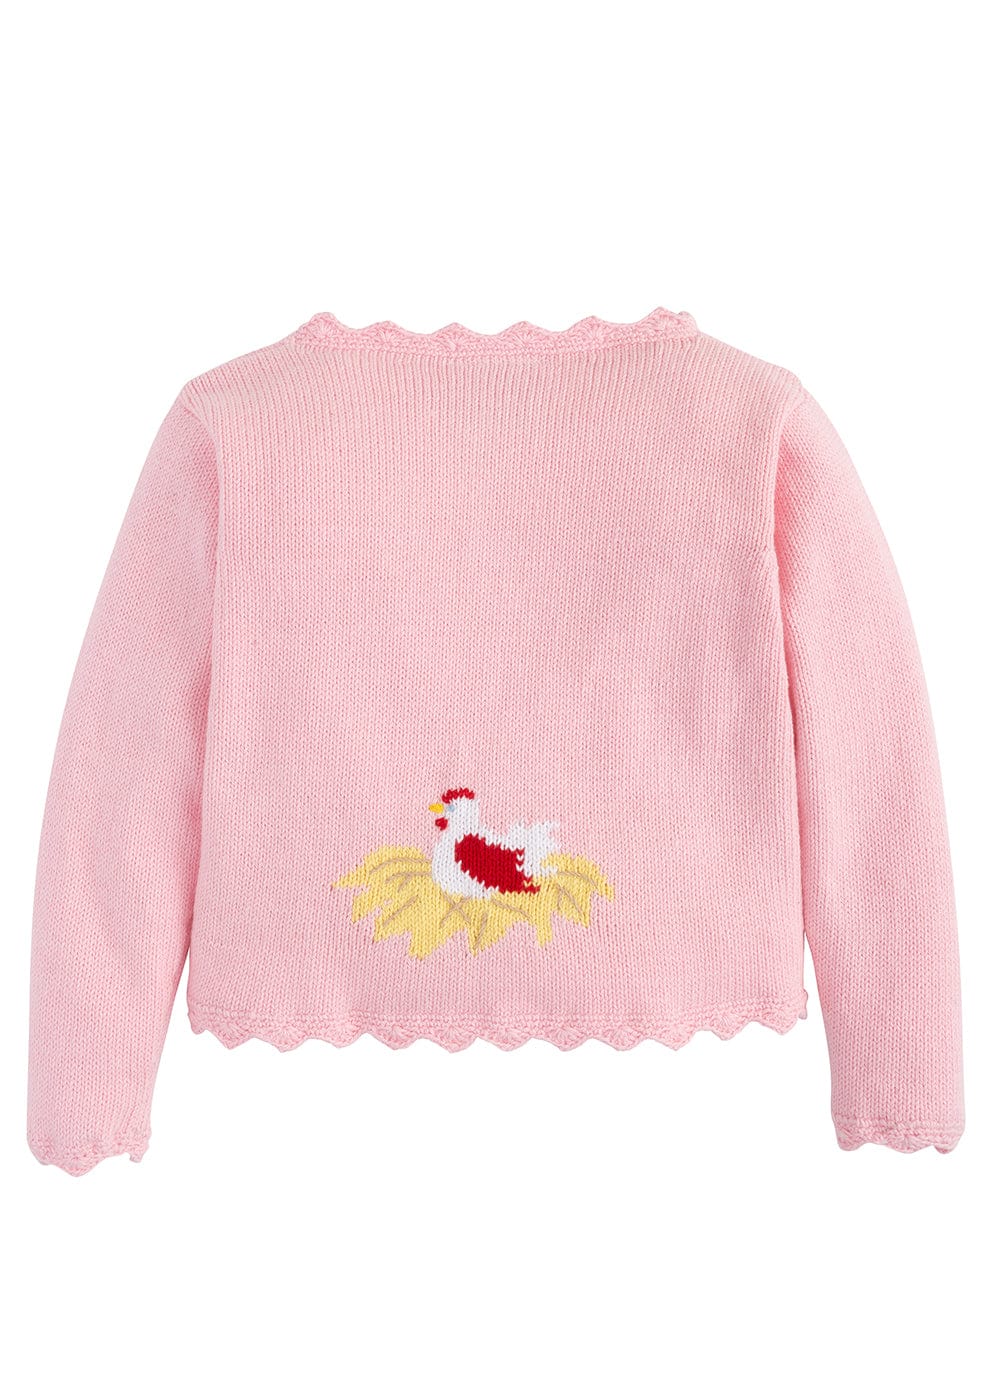 classic childrens clothing intarsia cardigan in light pink with chicken knit detail on front hem and back and ruffle detail